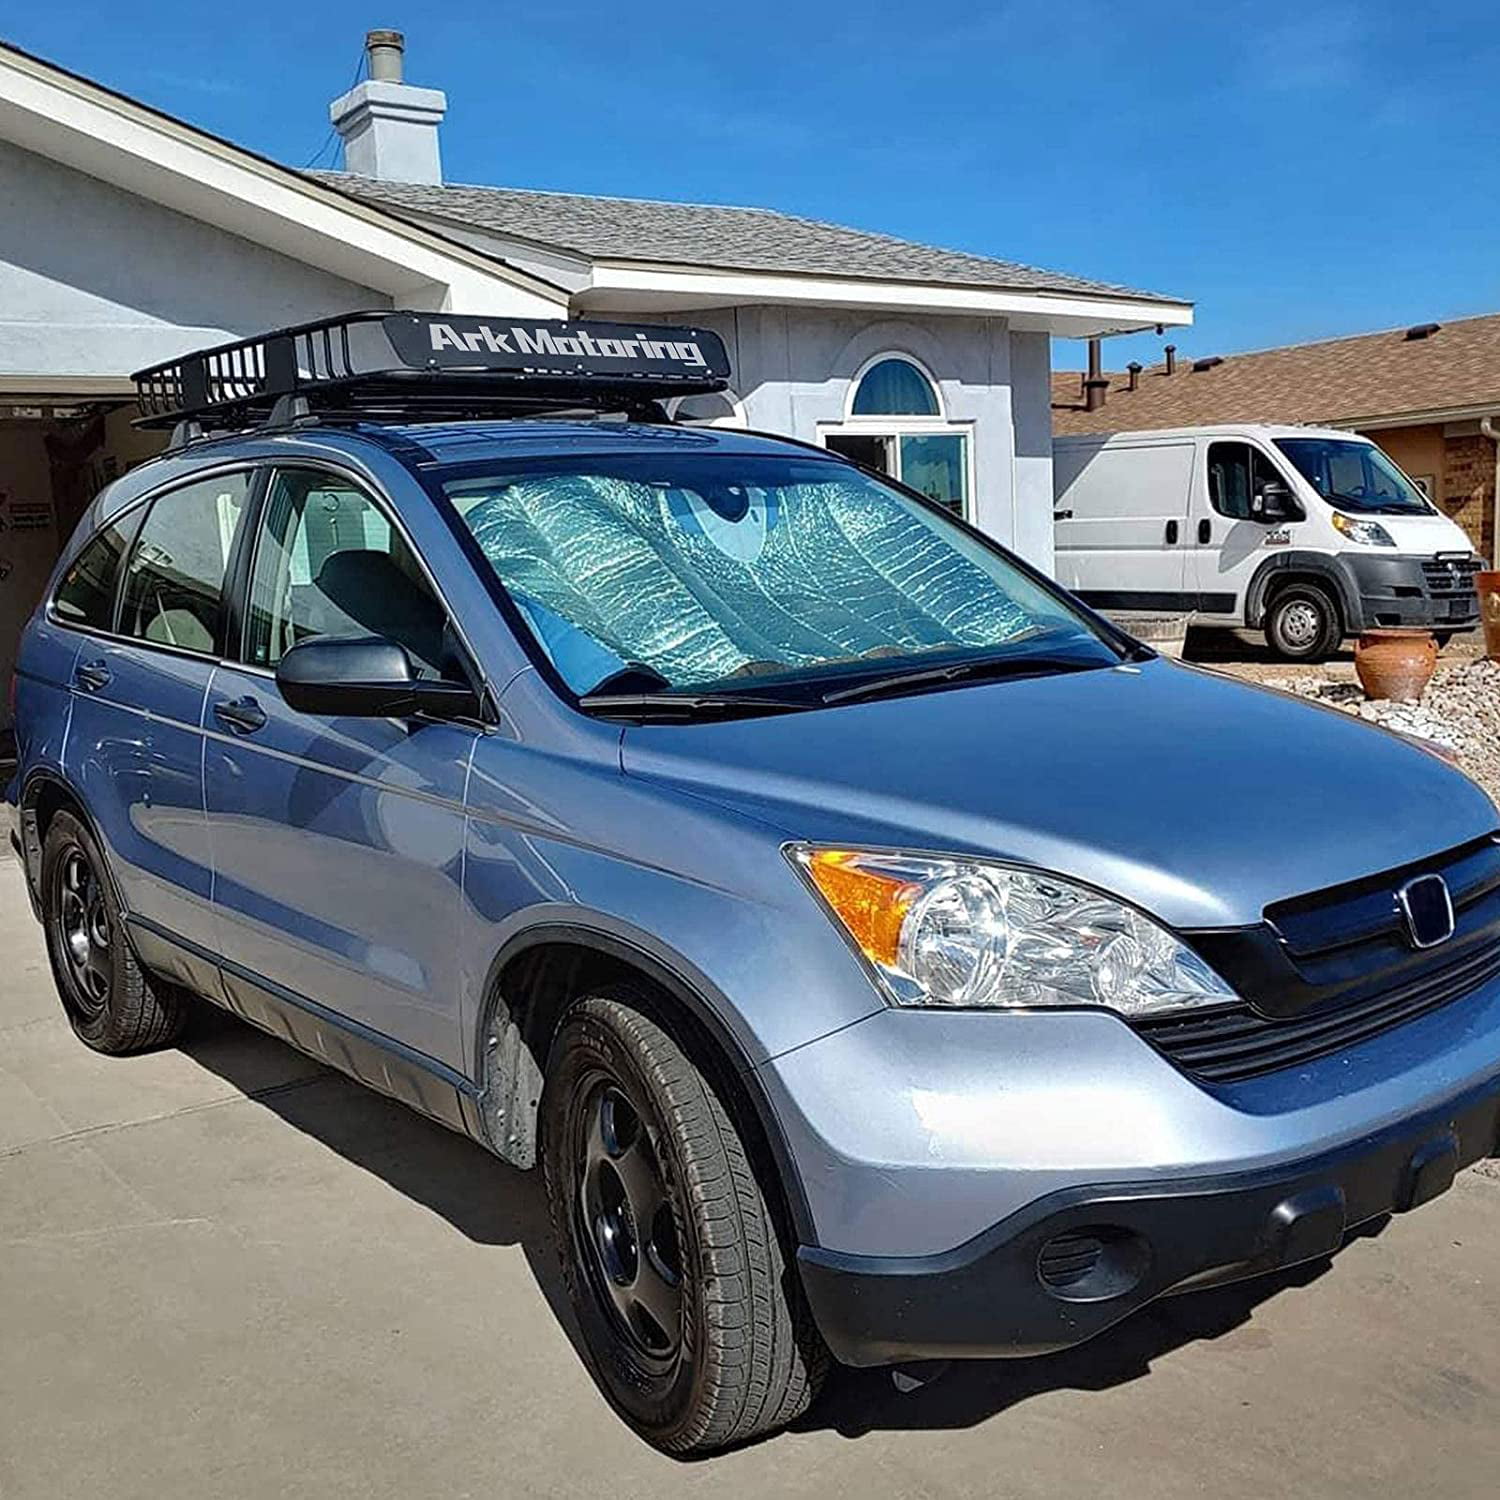 Roof Rack Tie Down Strap and Net 54 x 34 x 6 Rooftop Basket Cargo Carrier with Rack Extension Black Steel 